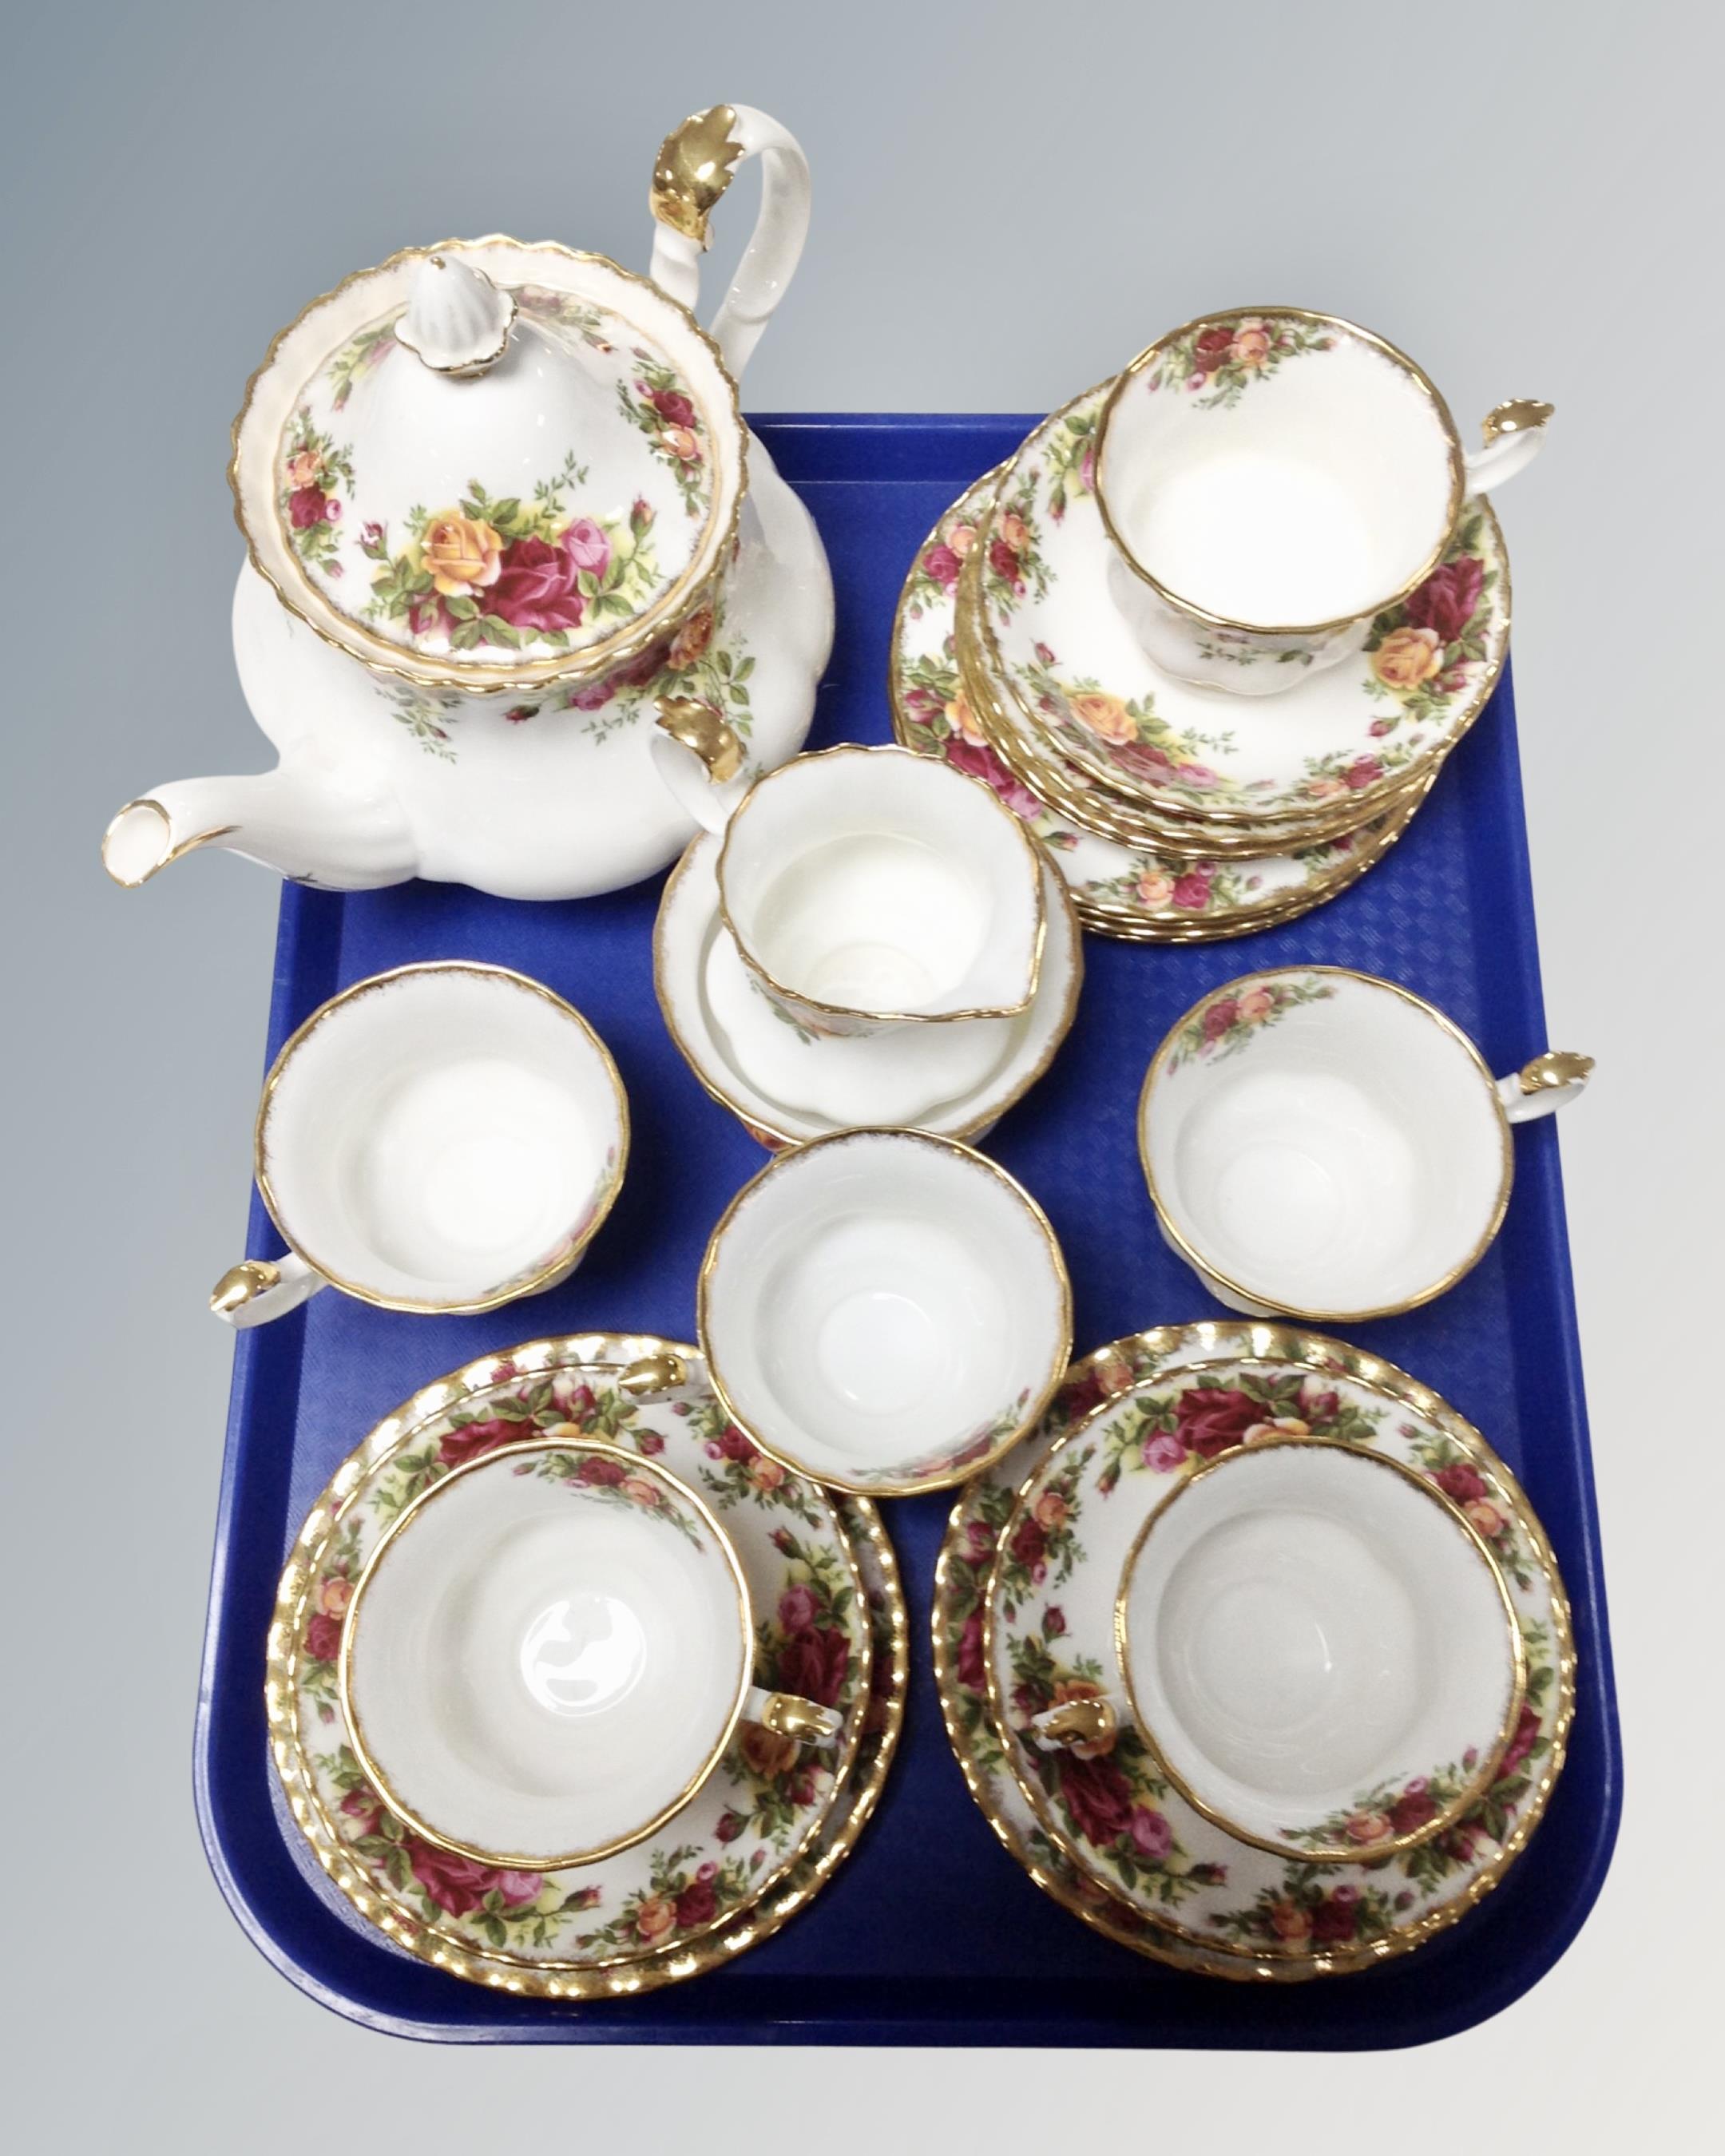 A tray containing twenty-one pieces of Royal Albert Old Country Roses tea china.